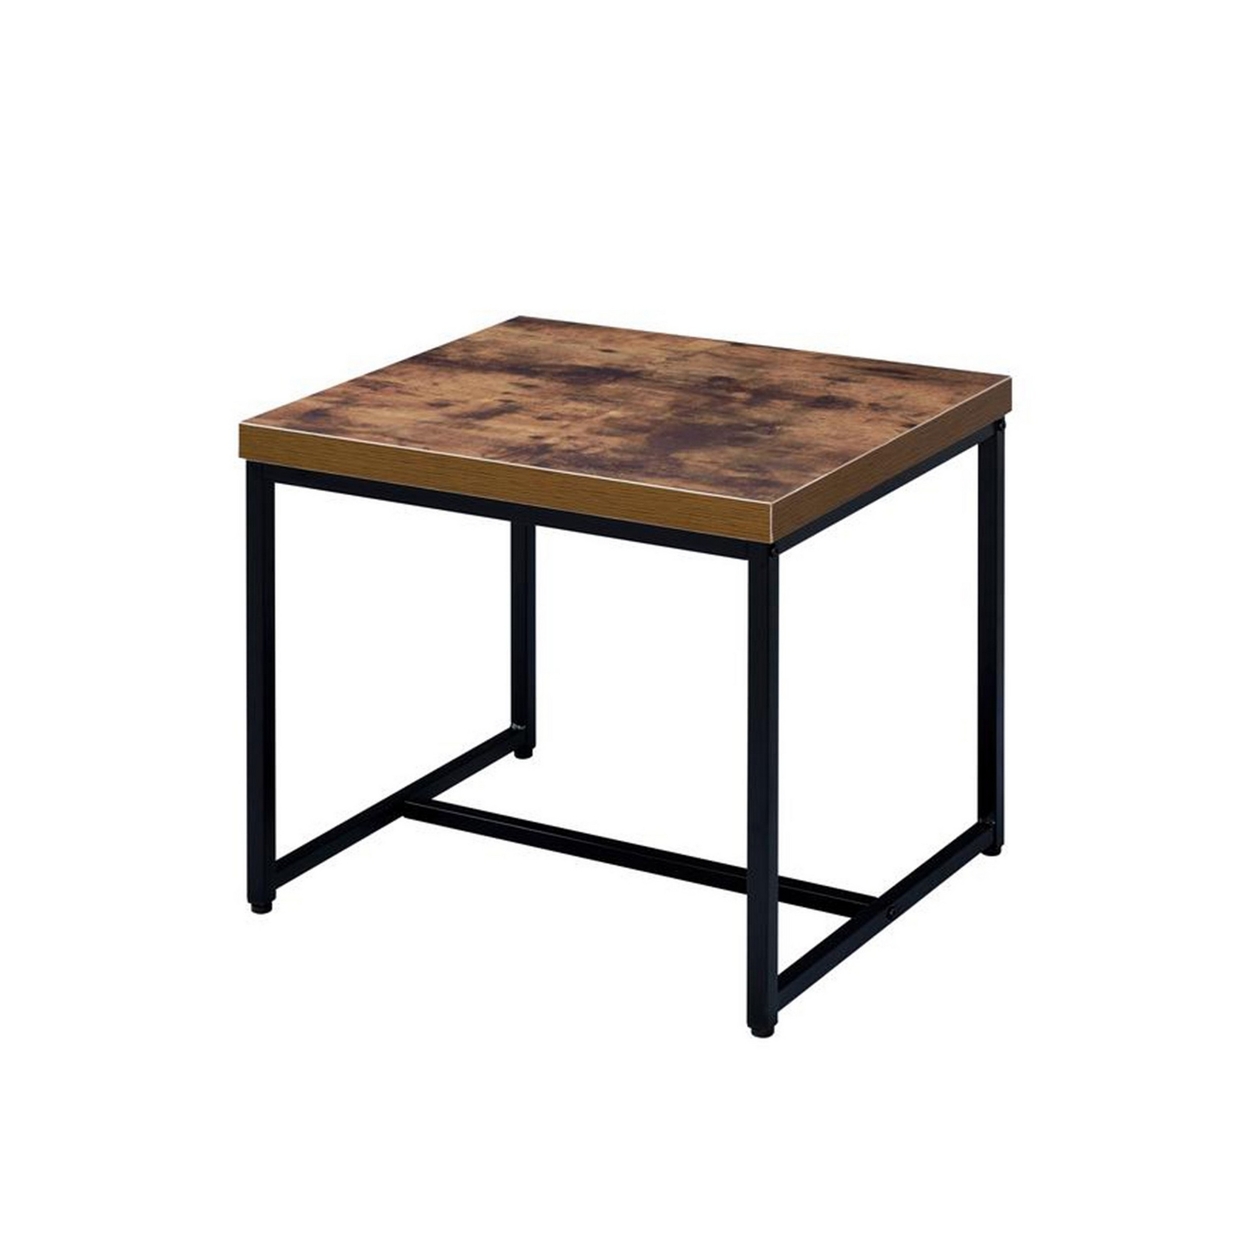 Contemporary Style Rectangular Wood And Metal End Table, Brown And Black- Saltoro Sherpi